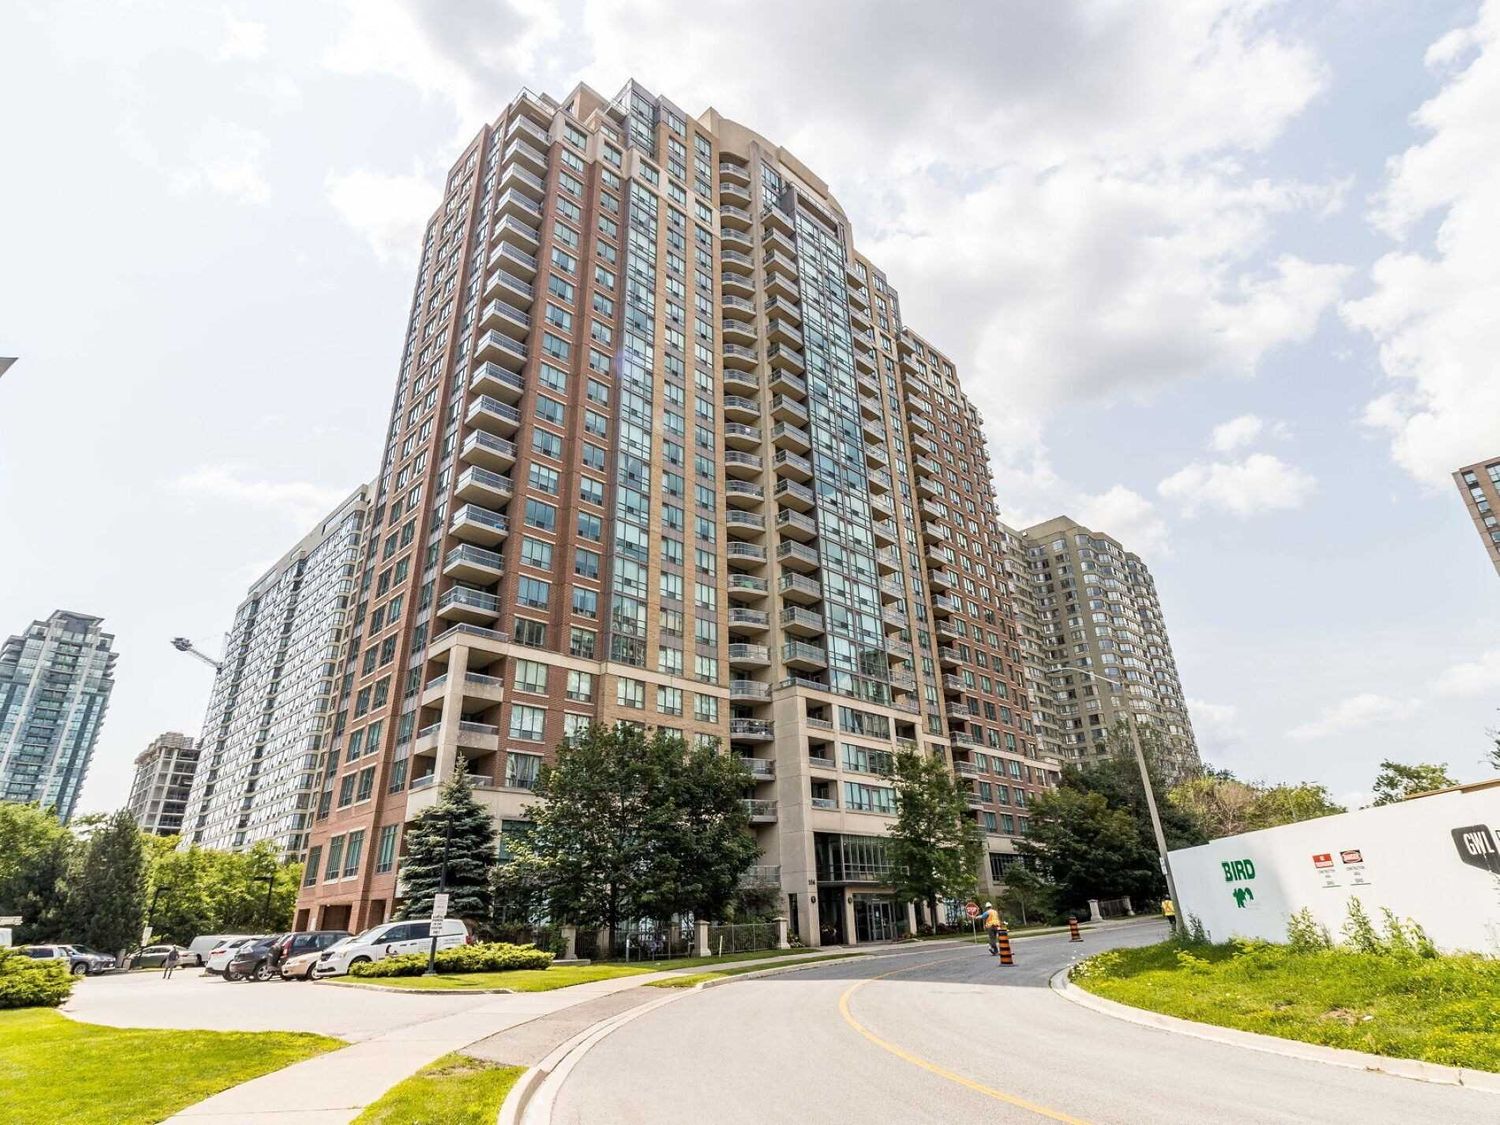 156 Enfield Place. Tiara Condos is located in  Mississauga, Toronto - image #1 of 3